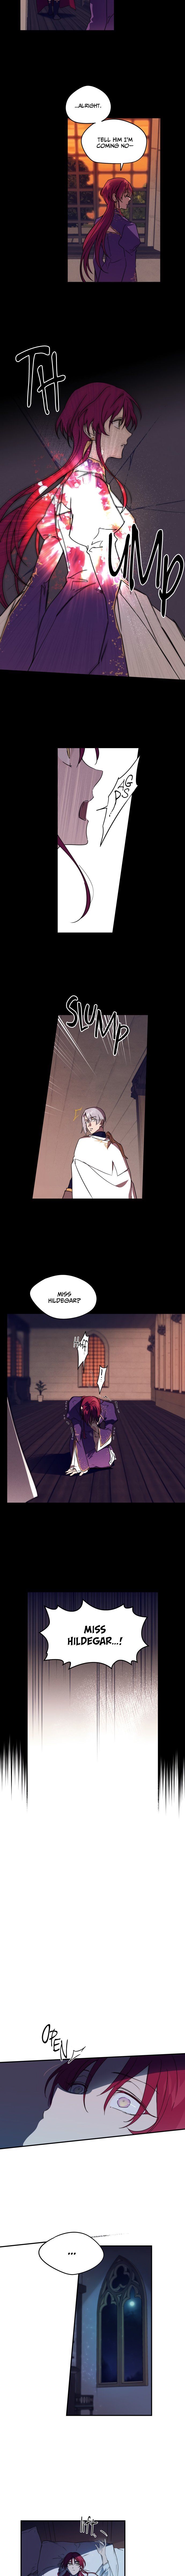 Blinded by the Setting Sun Chapter 3 page 6